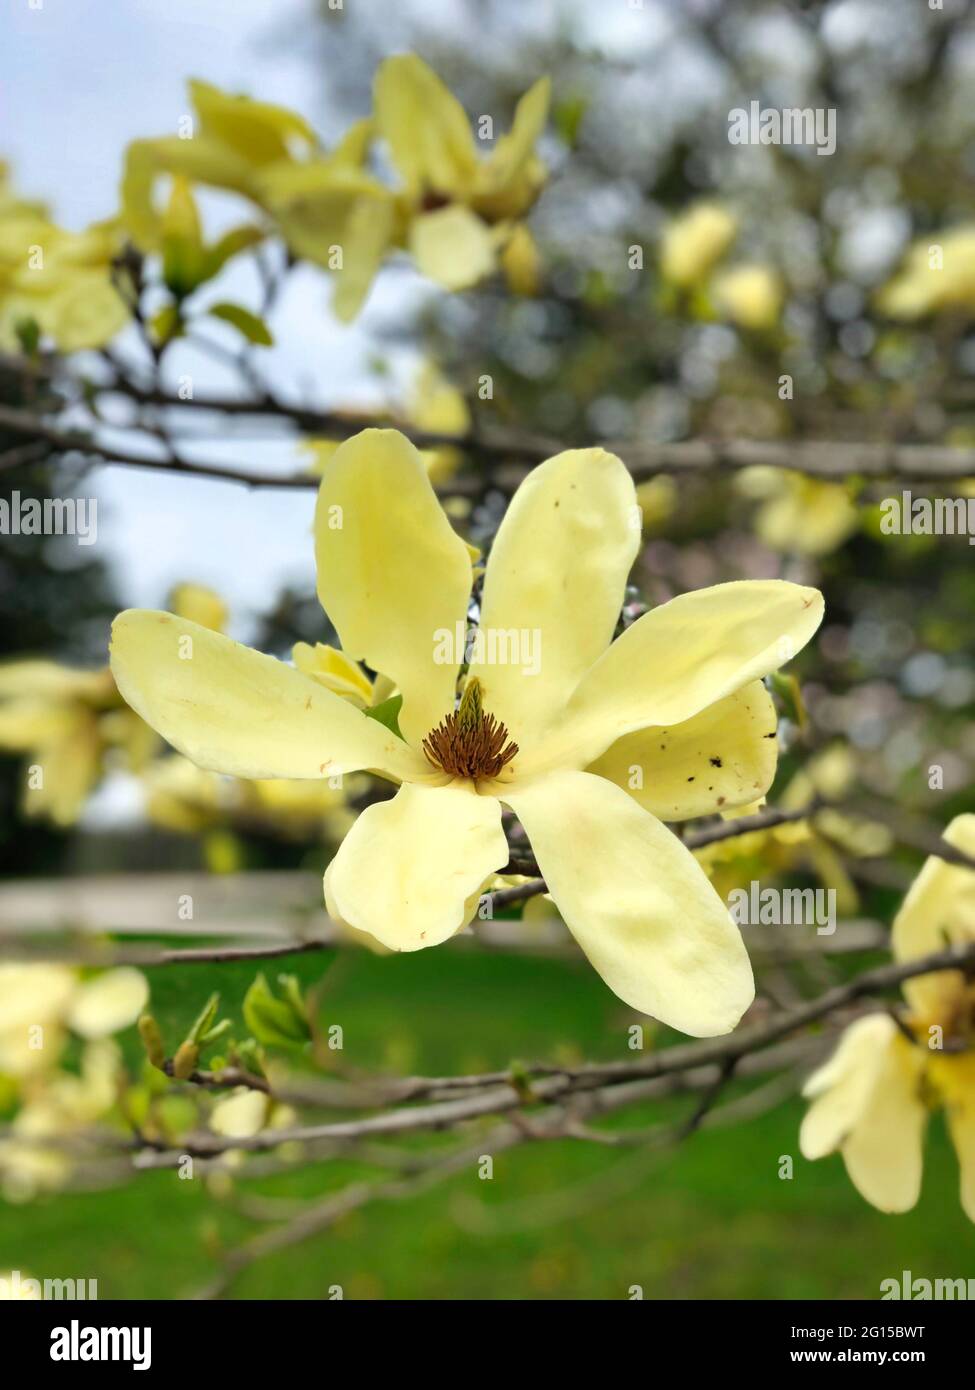 Yellow Magnolia in Full Bloom: The first signs of spring with a fully blooming yellow magnolia close-up on a sunny spring day in a macro view Stock Photo